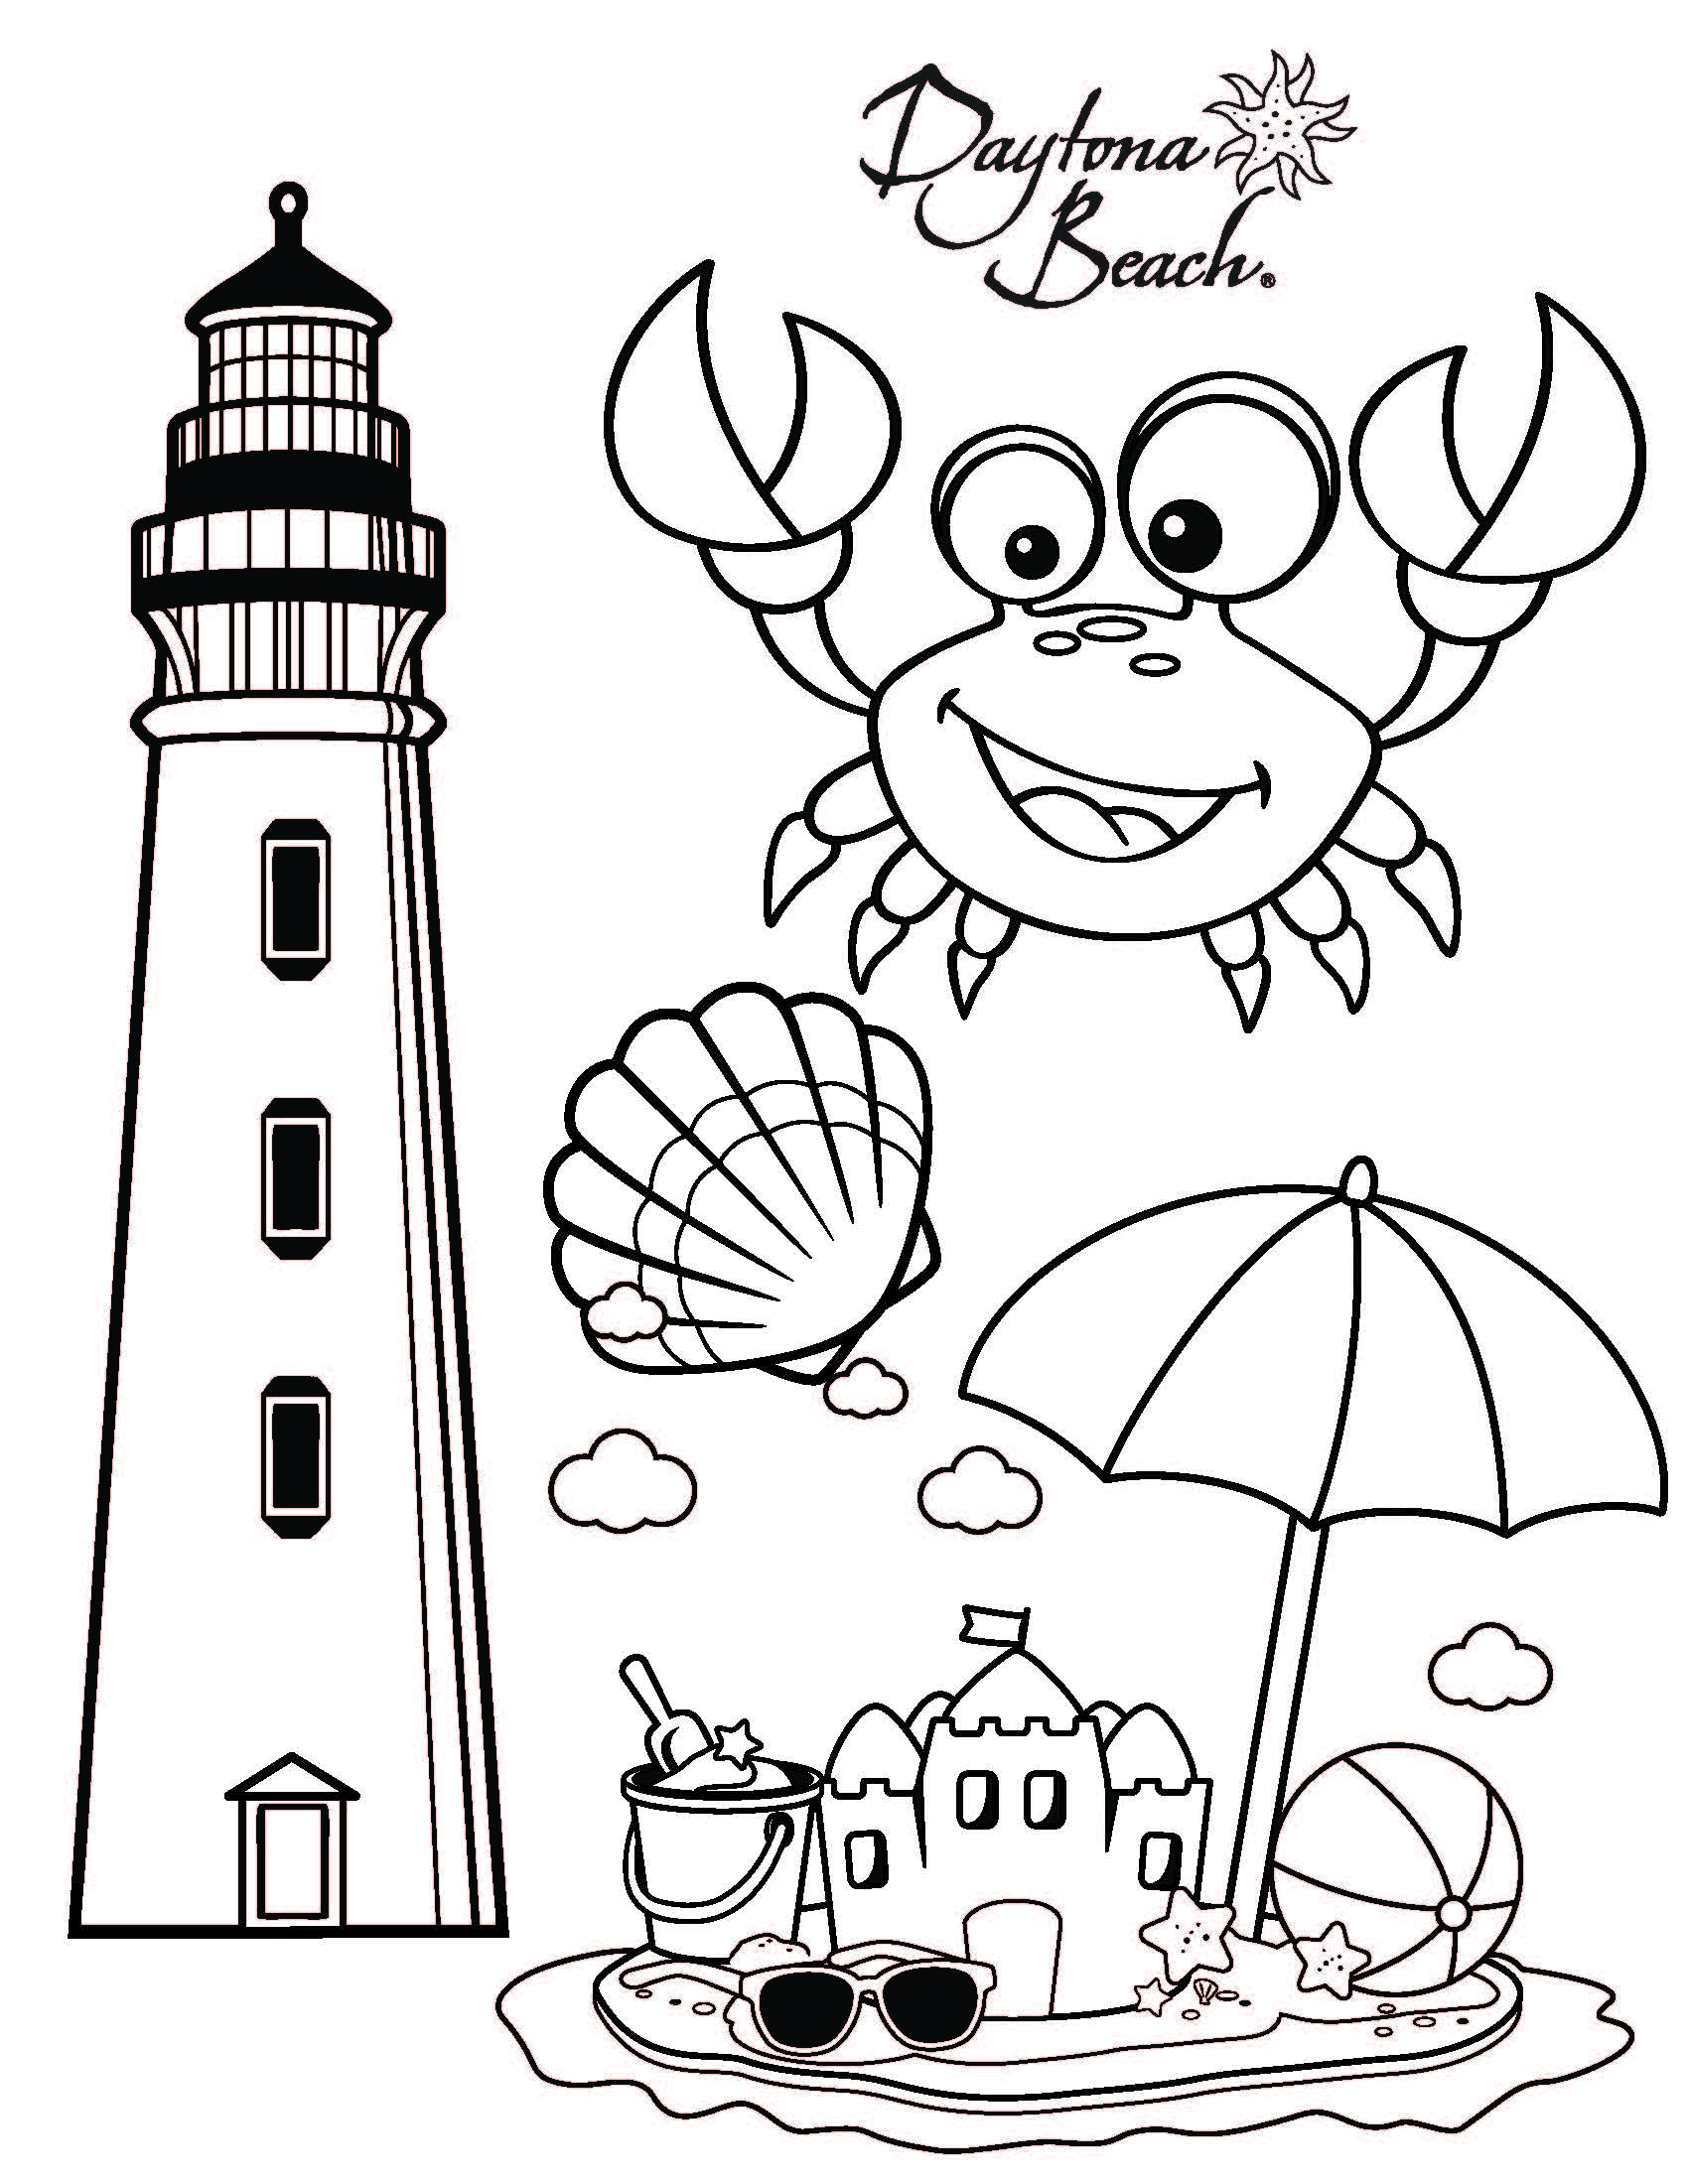 DB Coloring Page 2